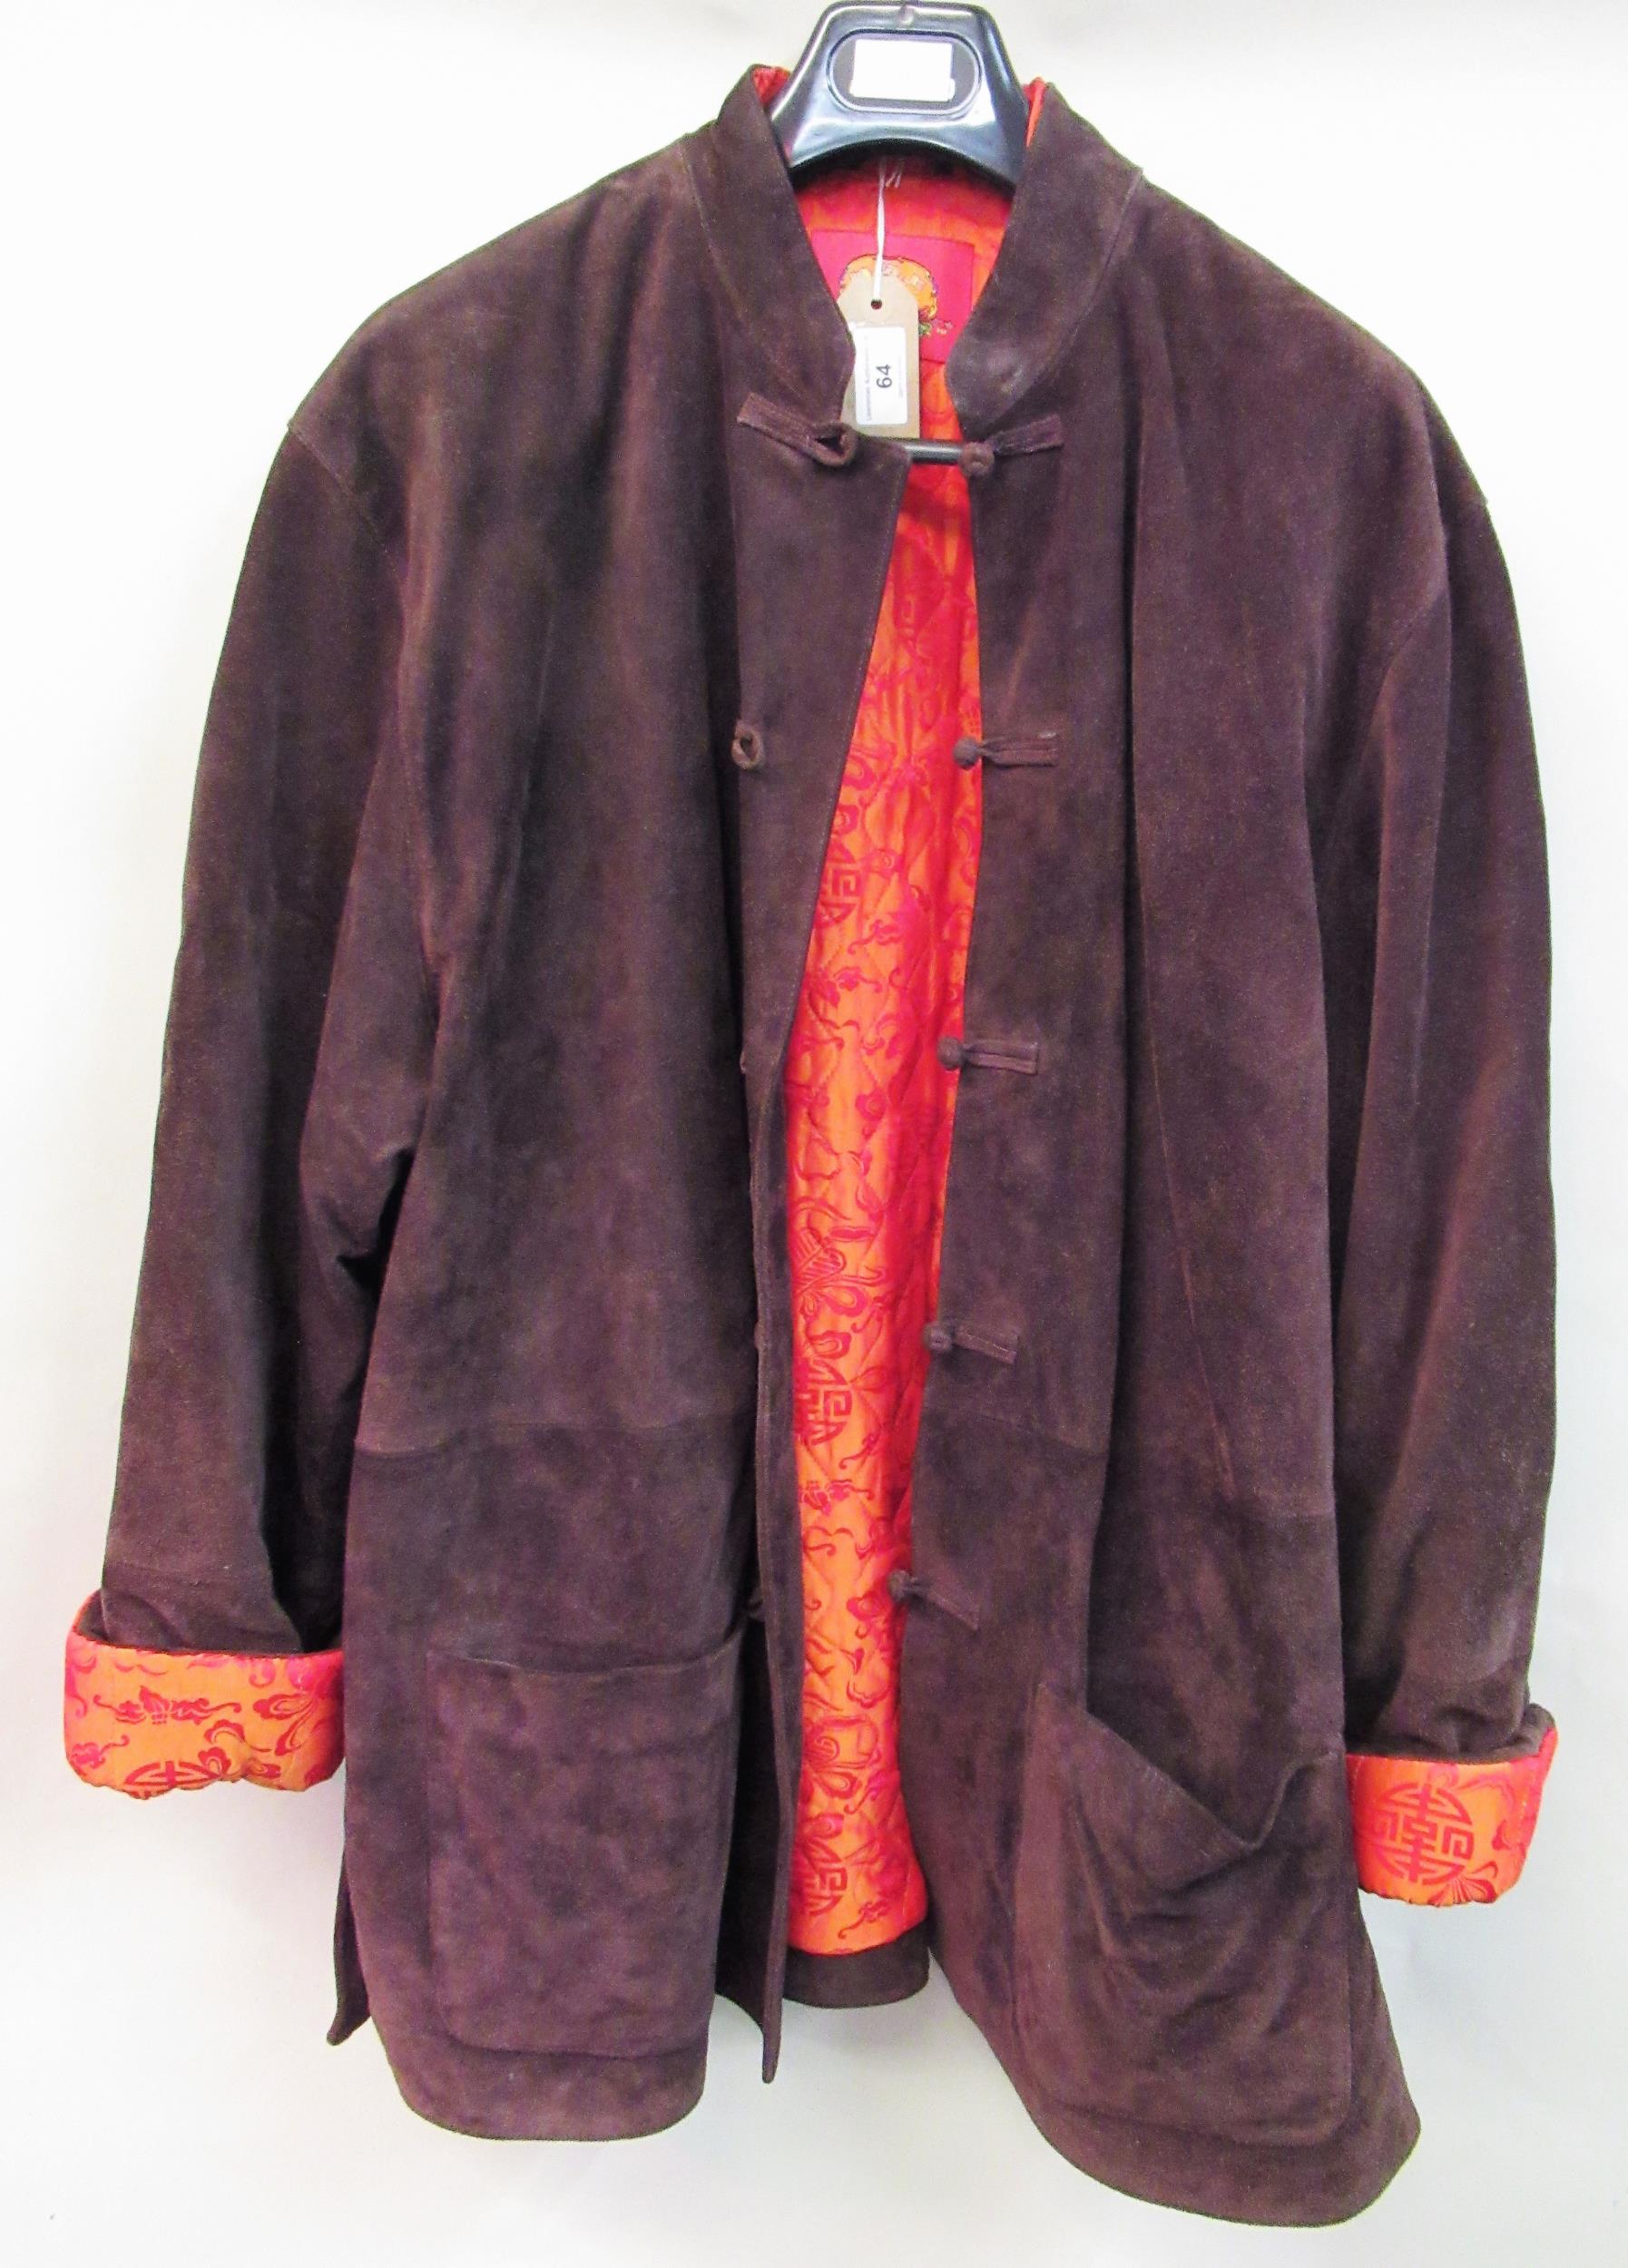 Shanghai Tang, gentleman's brown suede jacket, size 42 together with a Shanghai Tang reversible